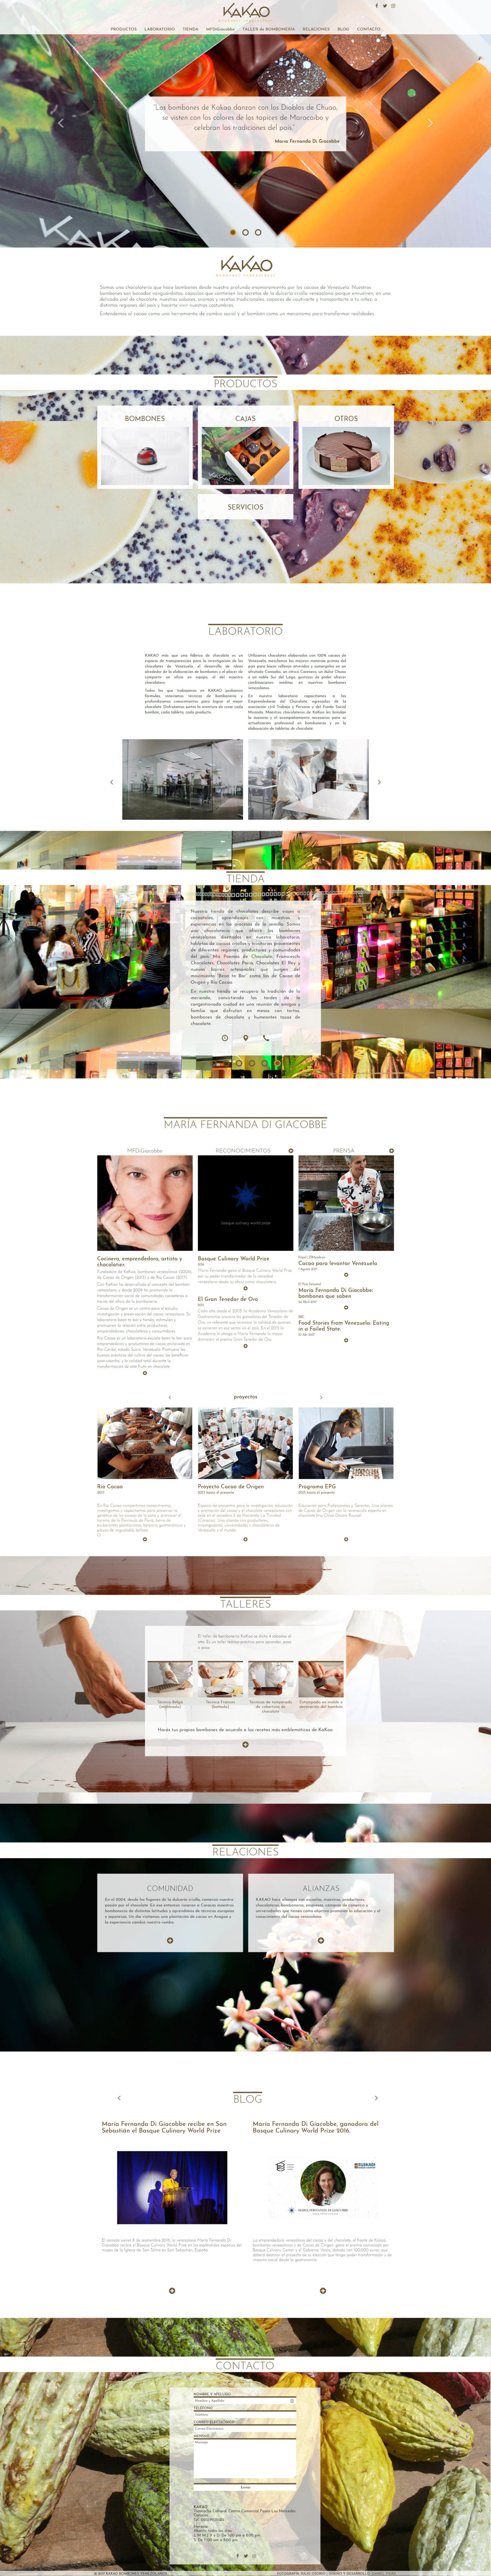 Kakao | Chocolate factory with a deep infatuation for Venezuelan' cocoa. Responsive infinite scroll website developed for WordPress with bootstrap